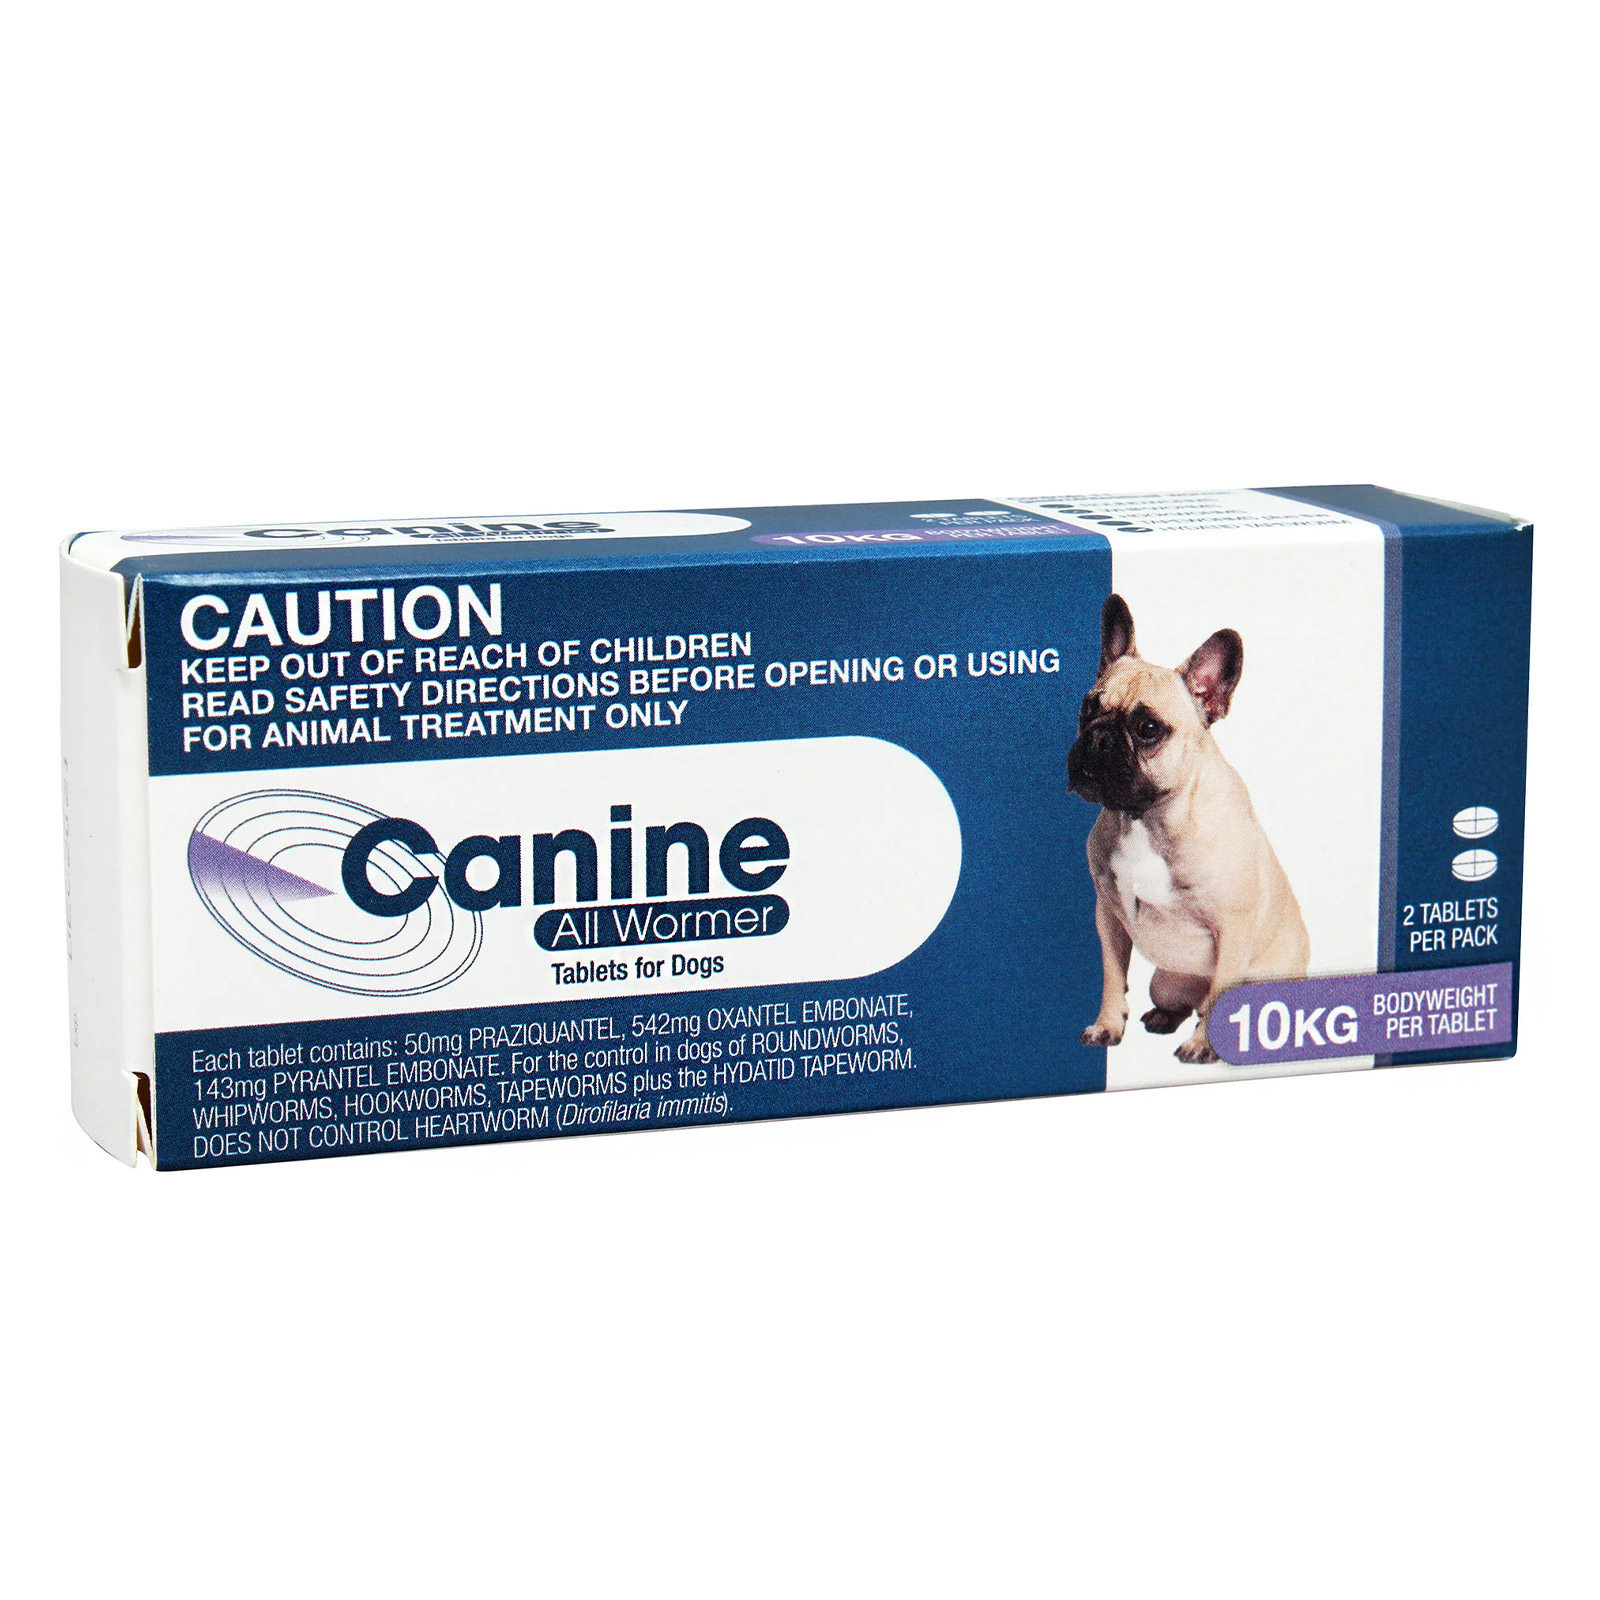 Value Plus Canine All Wormer Tablets for Dogs